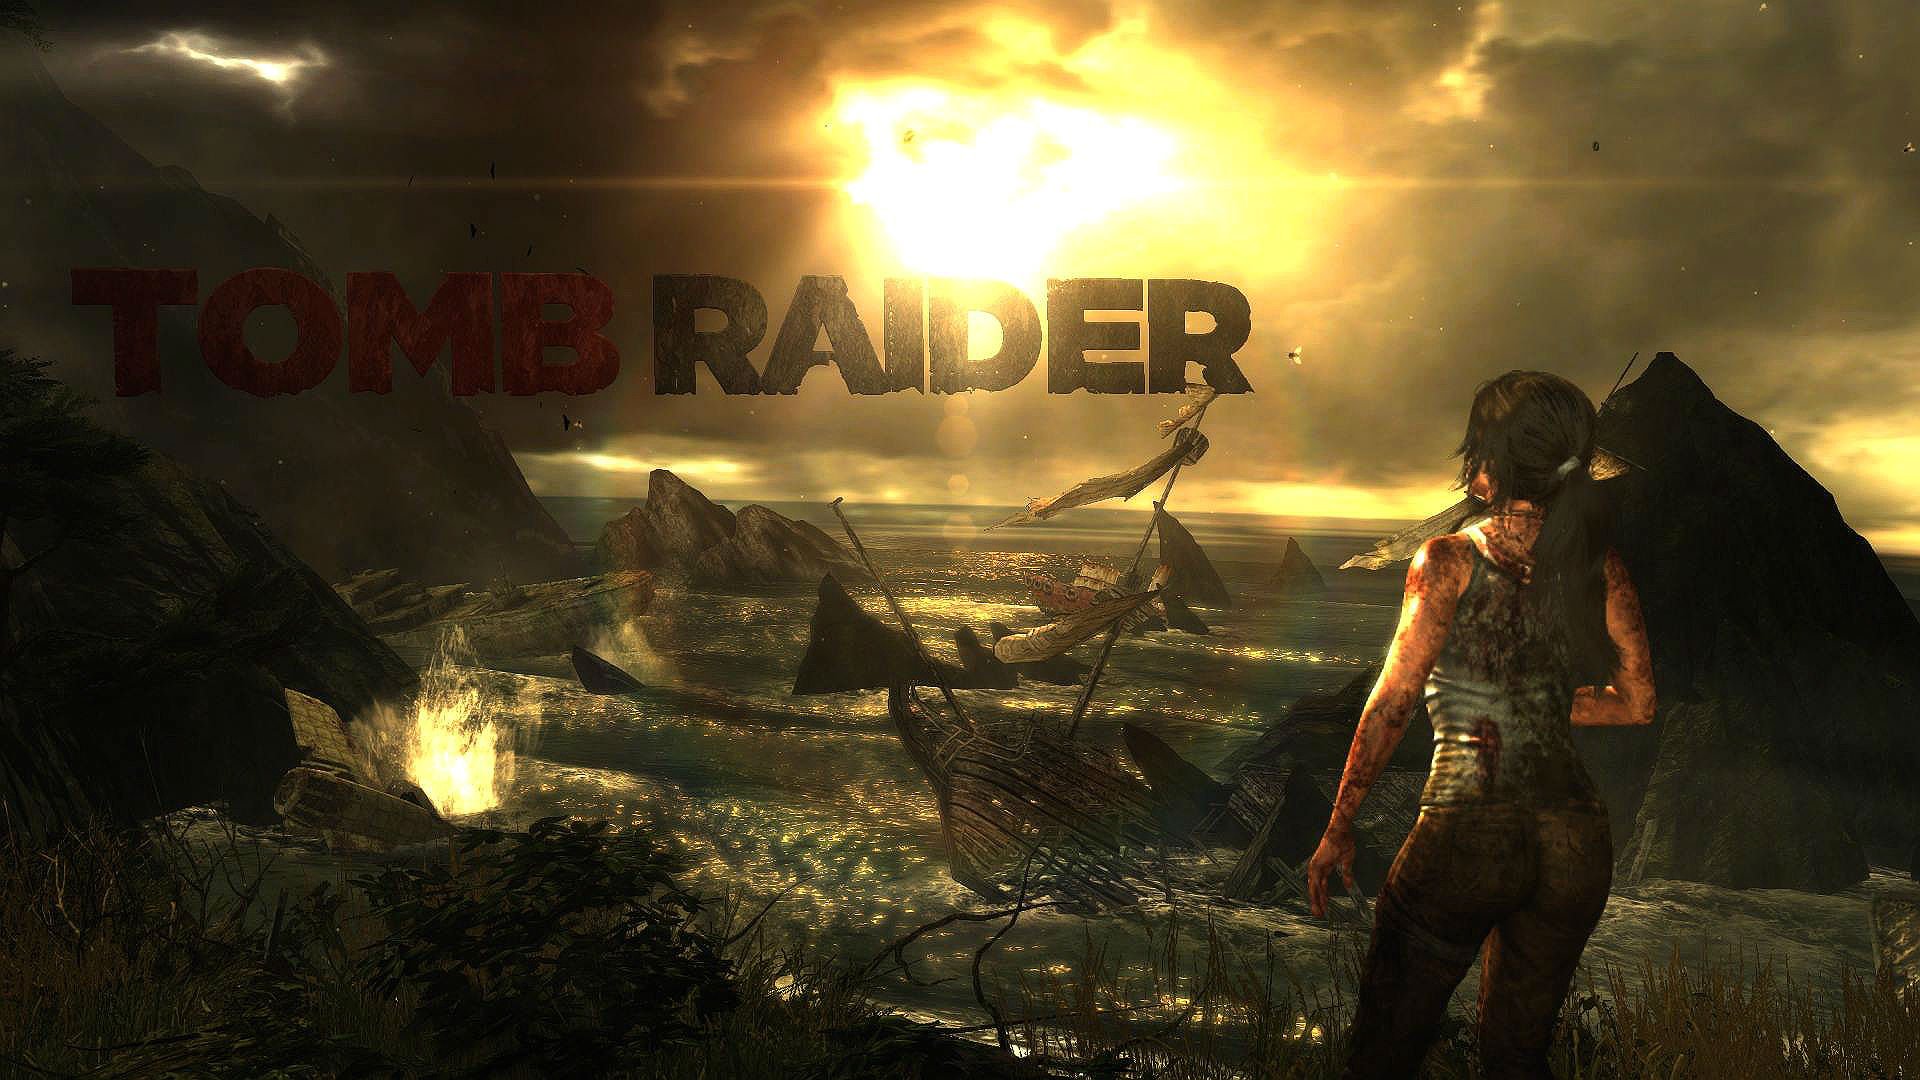 Tomb raider in steam фото 114